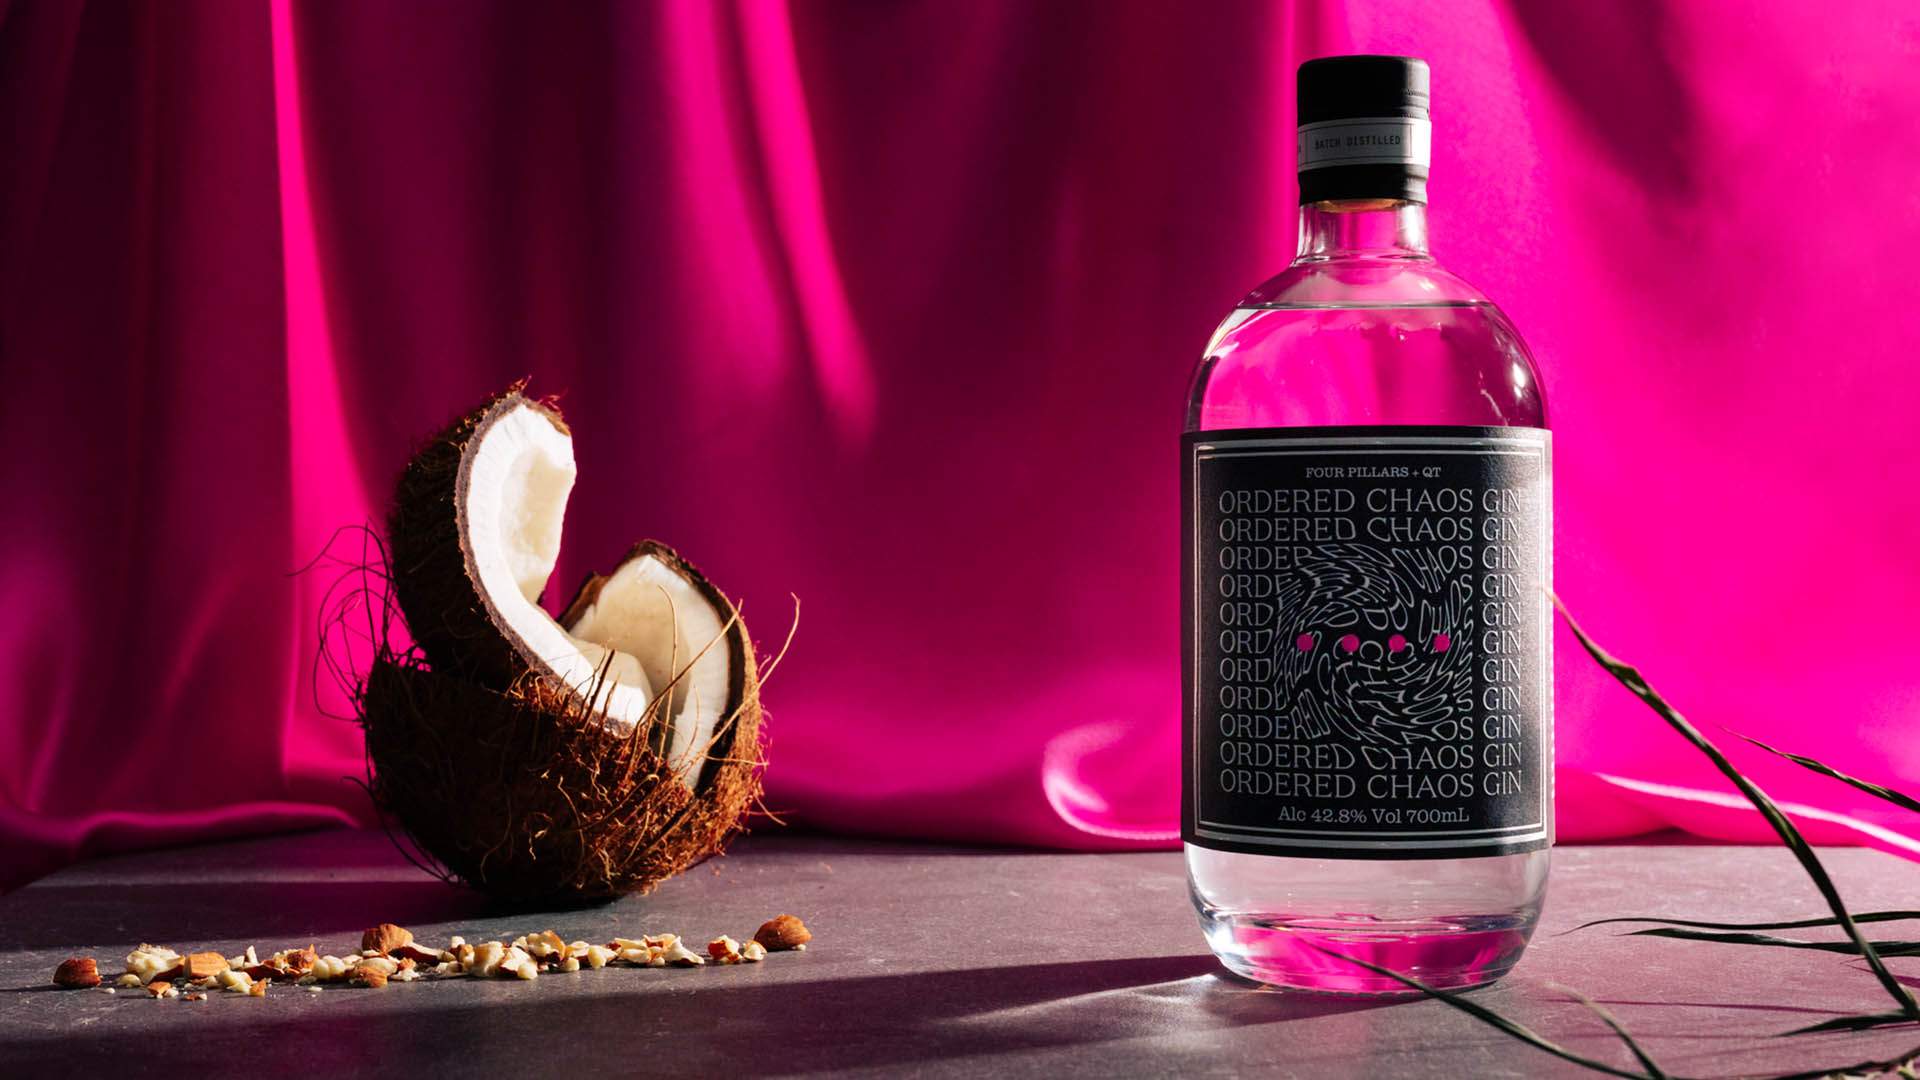 Four Pillars Has Teamed Up with QT Hotels On a Limited-Edition Coconut, Bamboo and Almond Gin